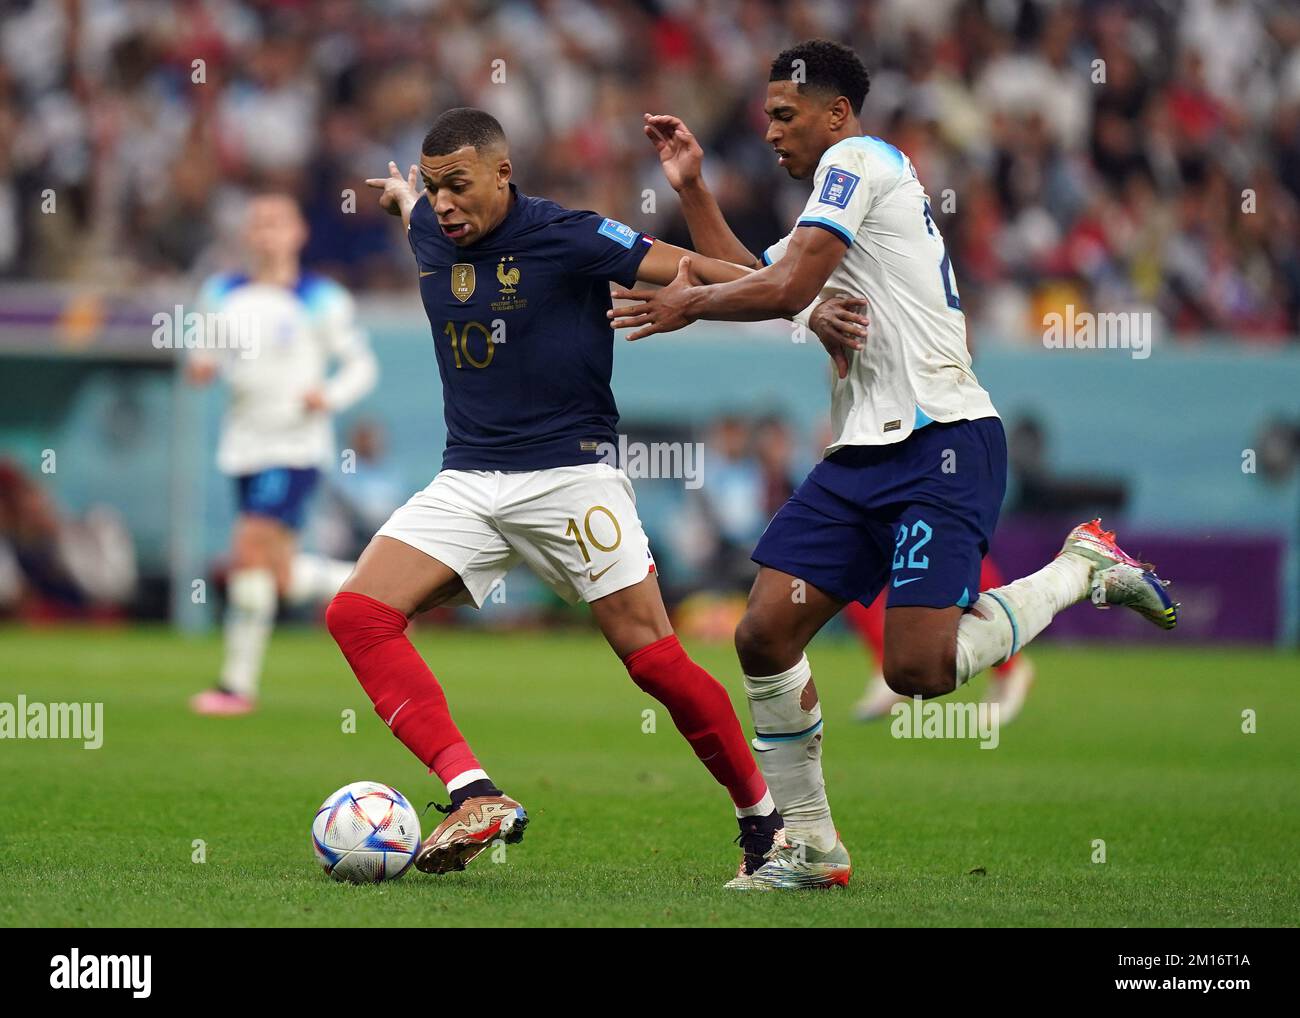 Frances Kylian Mbappe and Englands Jude Bellingham battle for the ball during the FIFA World Cup Quarter-Final match at the Al Bayt Stadium in Al Khor, Qatar